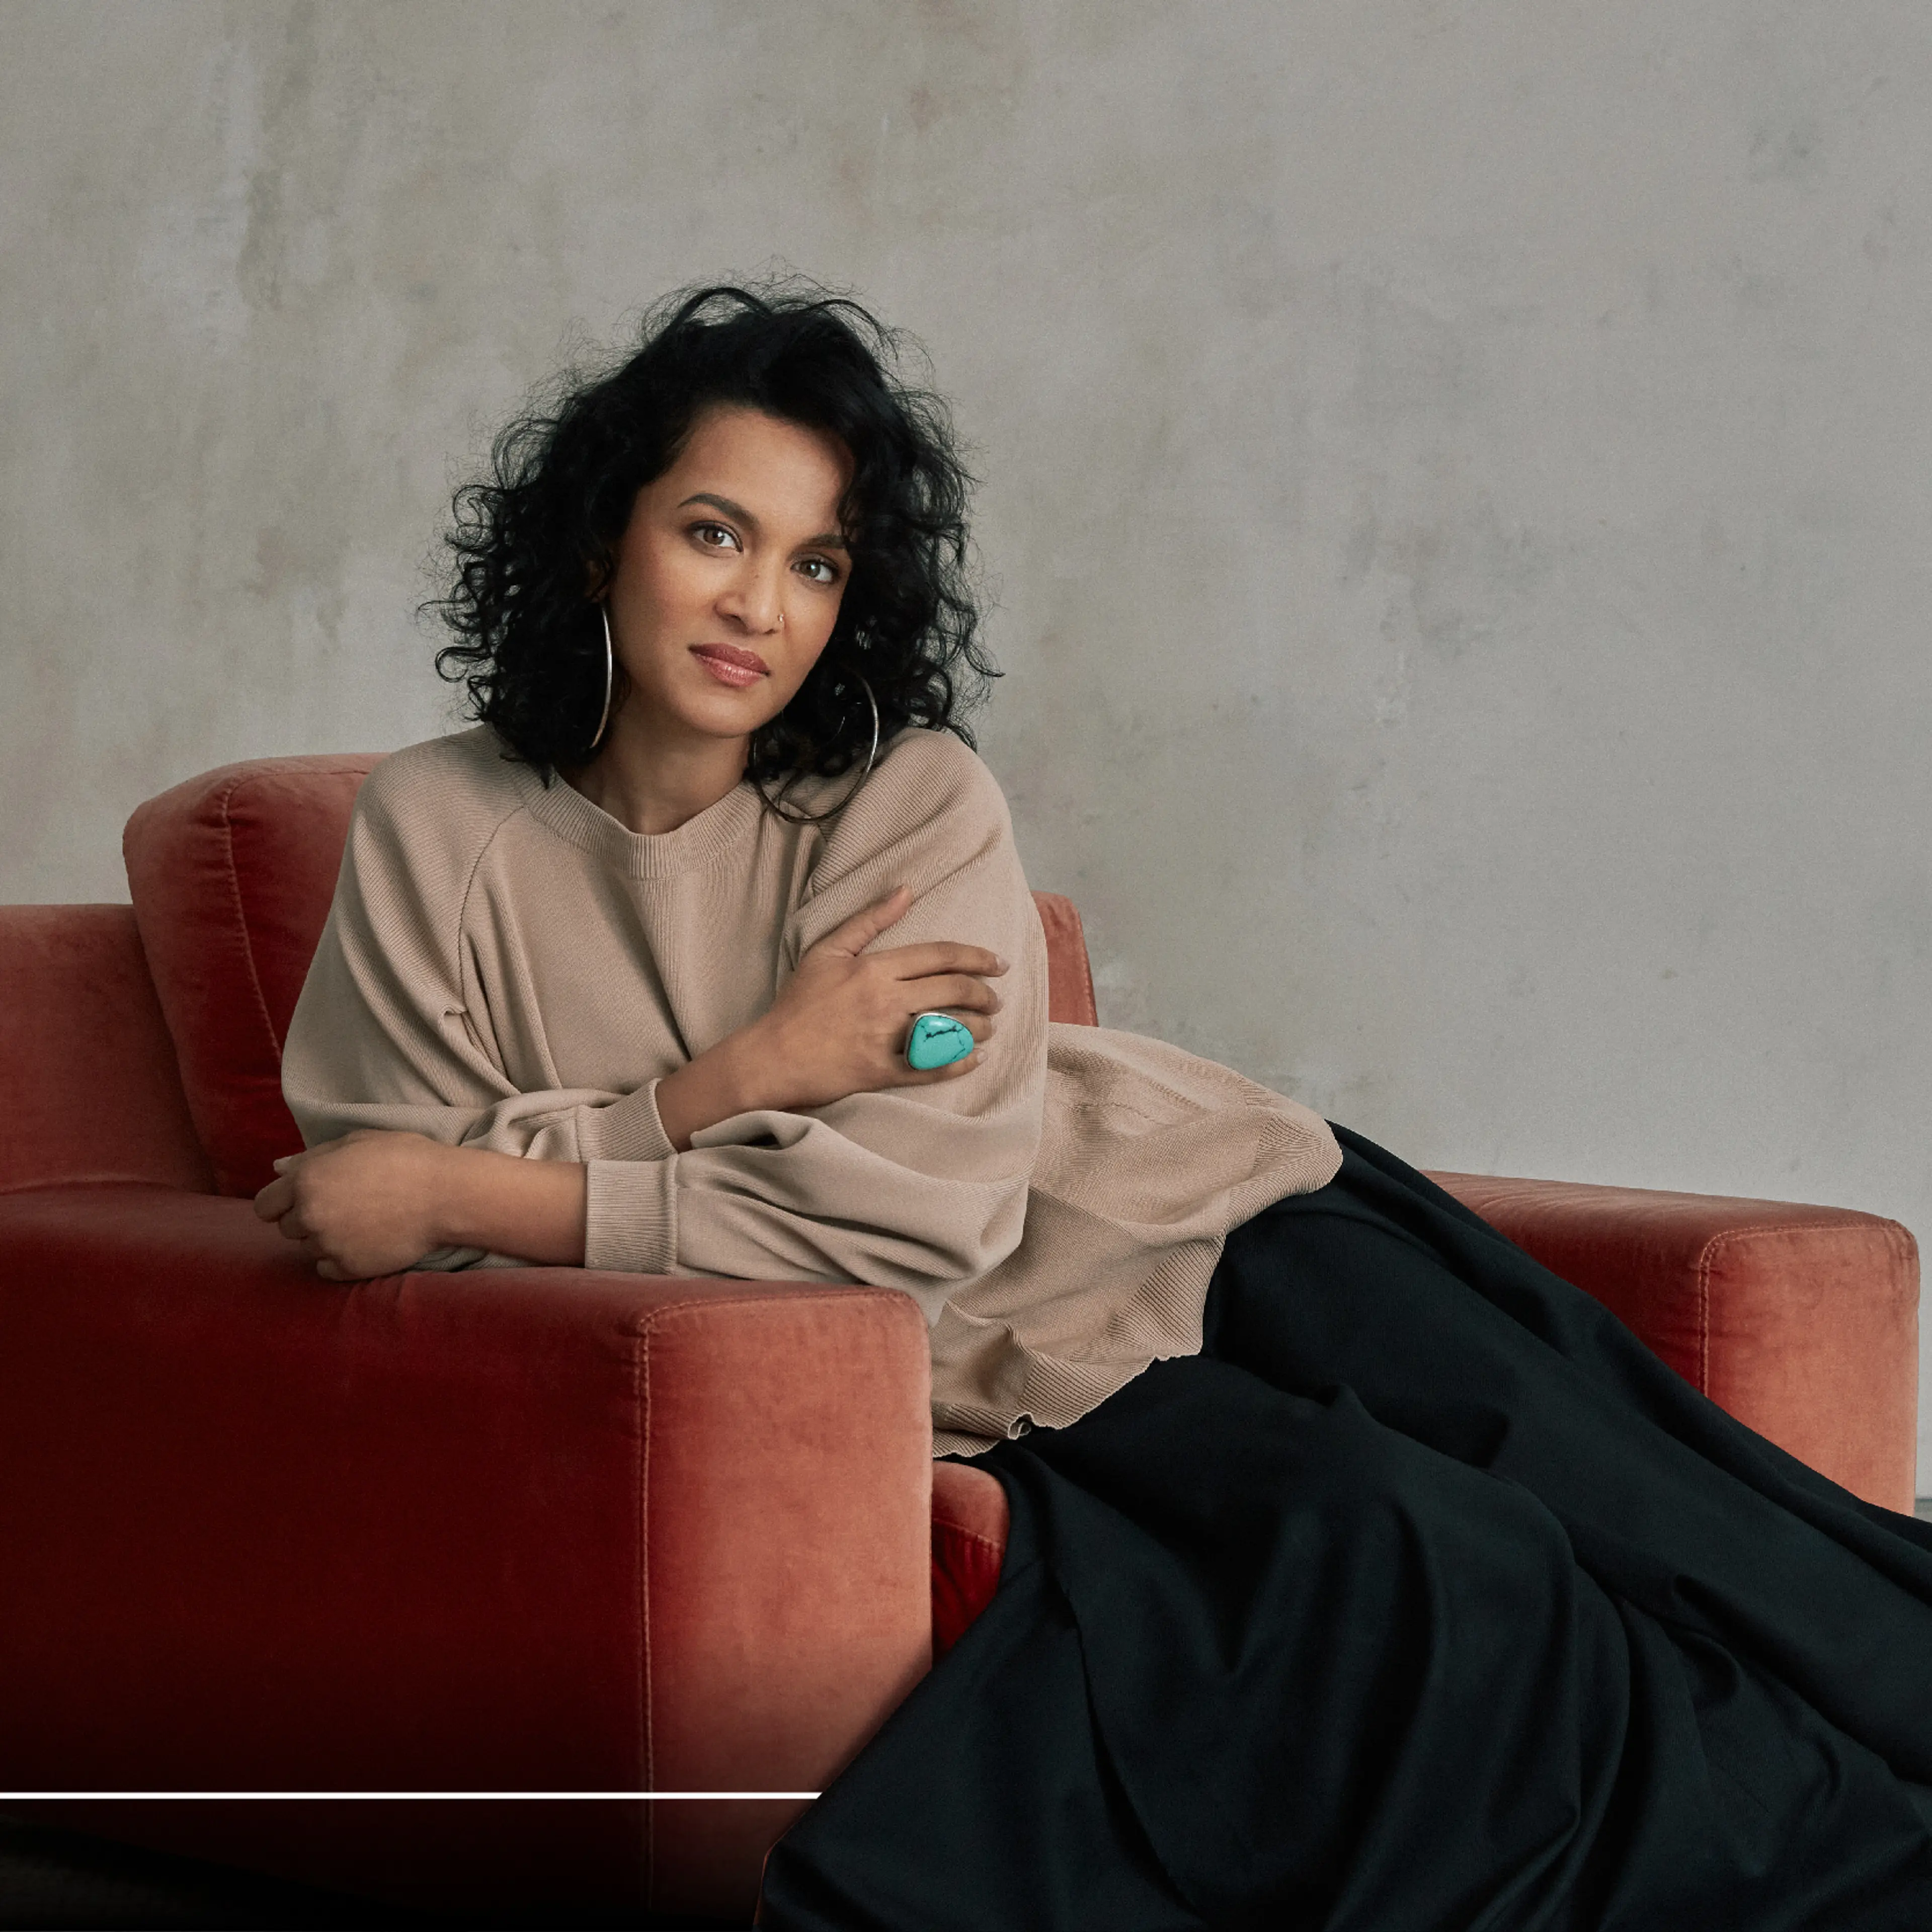 Anoushka Shankar on her latest mini album, the power of collaboration, and forging her own path